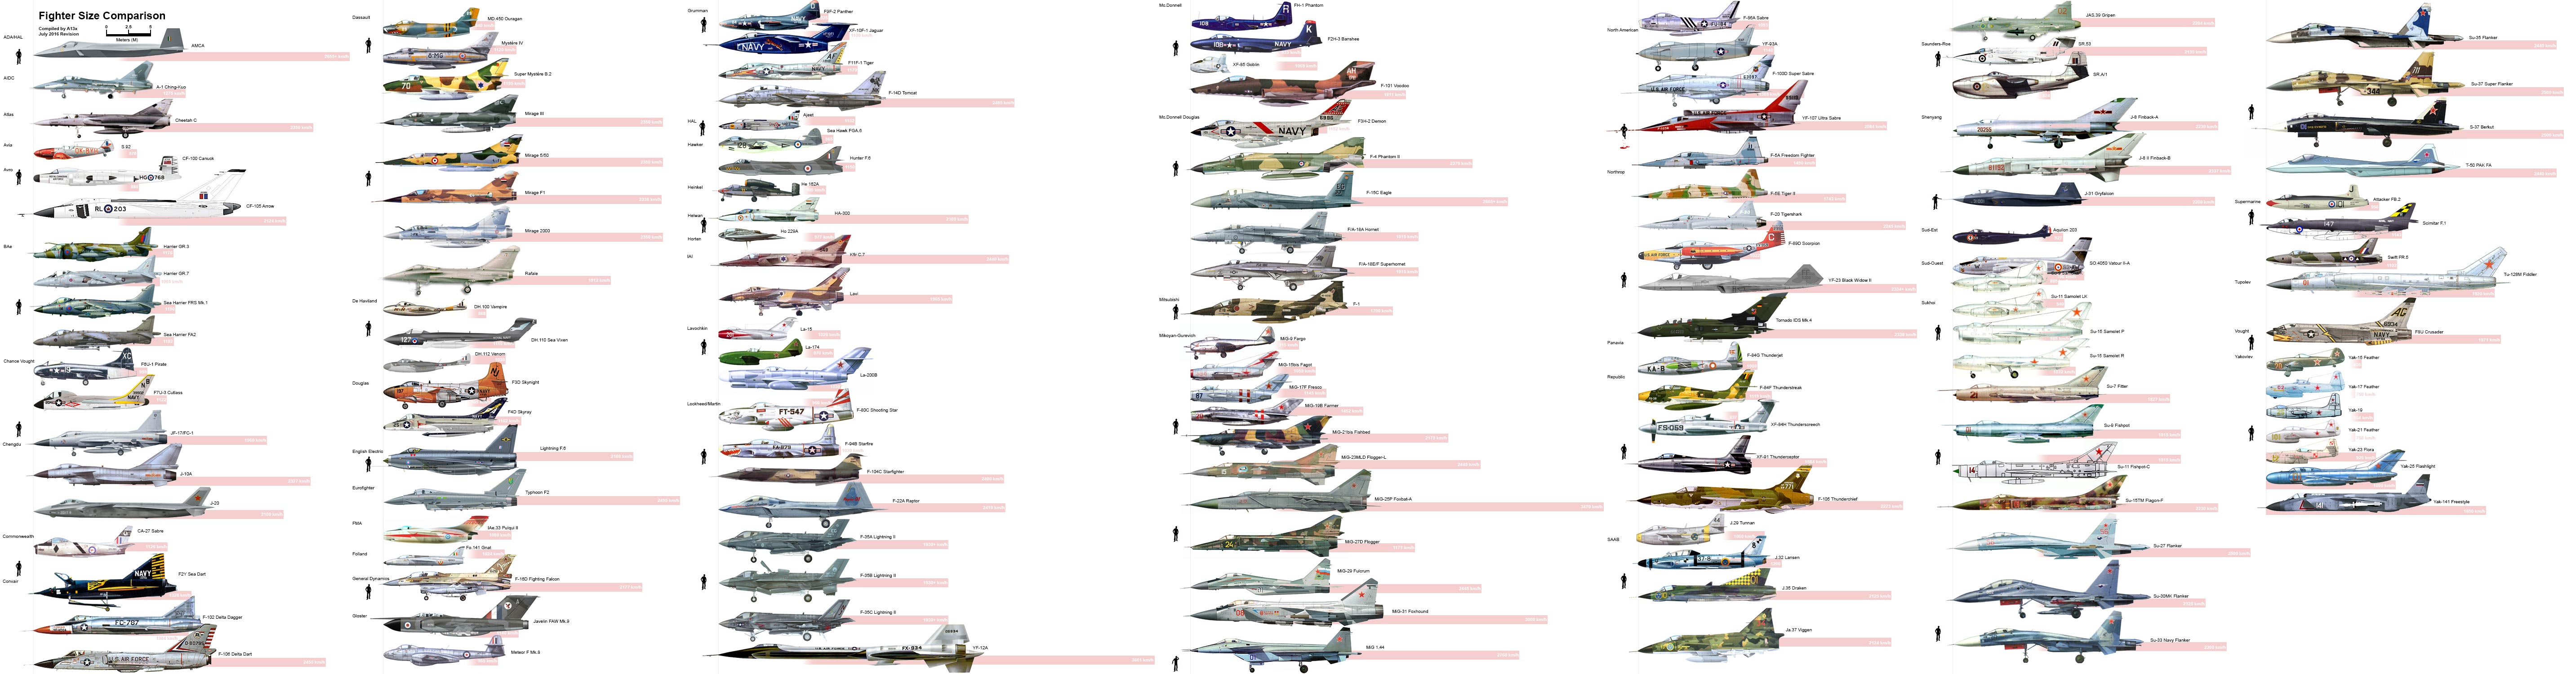 Aircraft Size Comparison Charts - Compiled by A13x